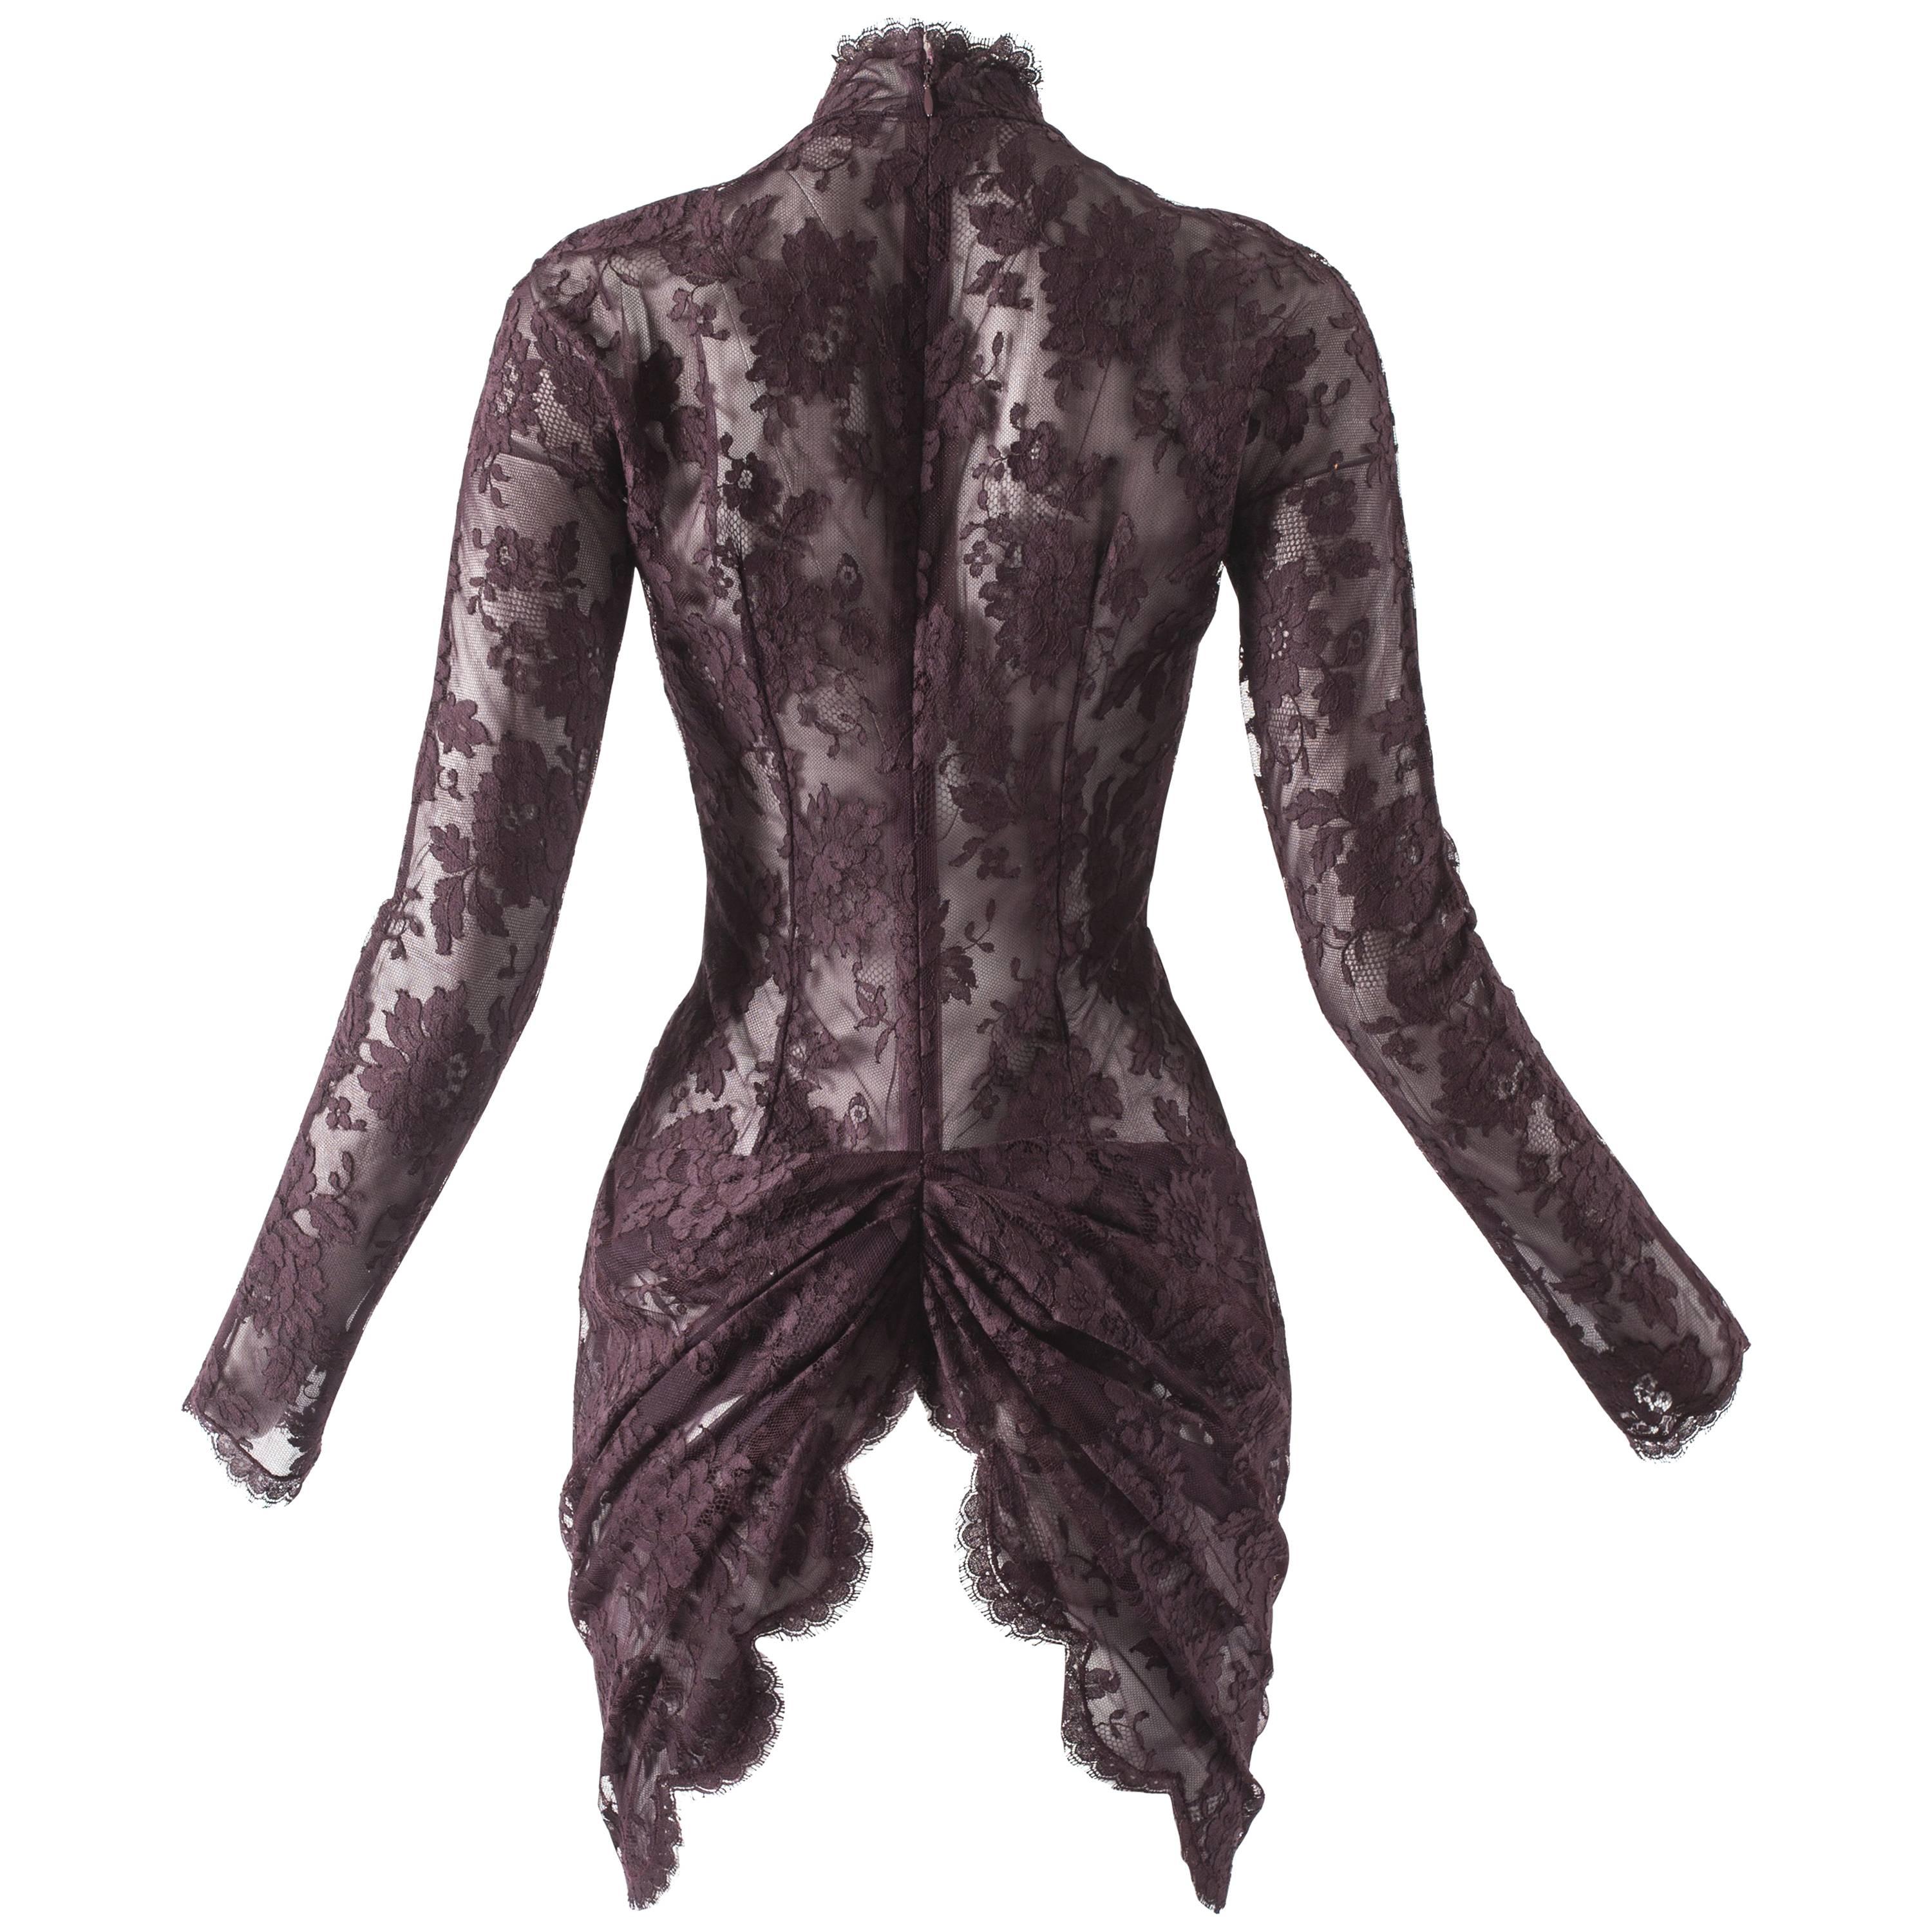 Givenchy by John Galliano Haute Couture Autumn-Winter 1996 lace mini dress